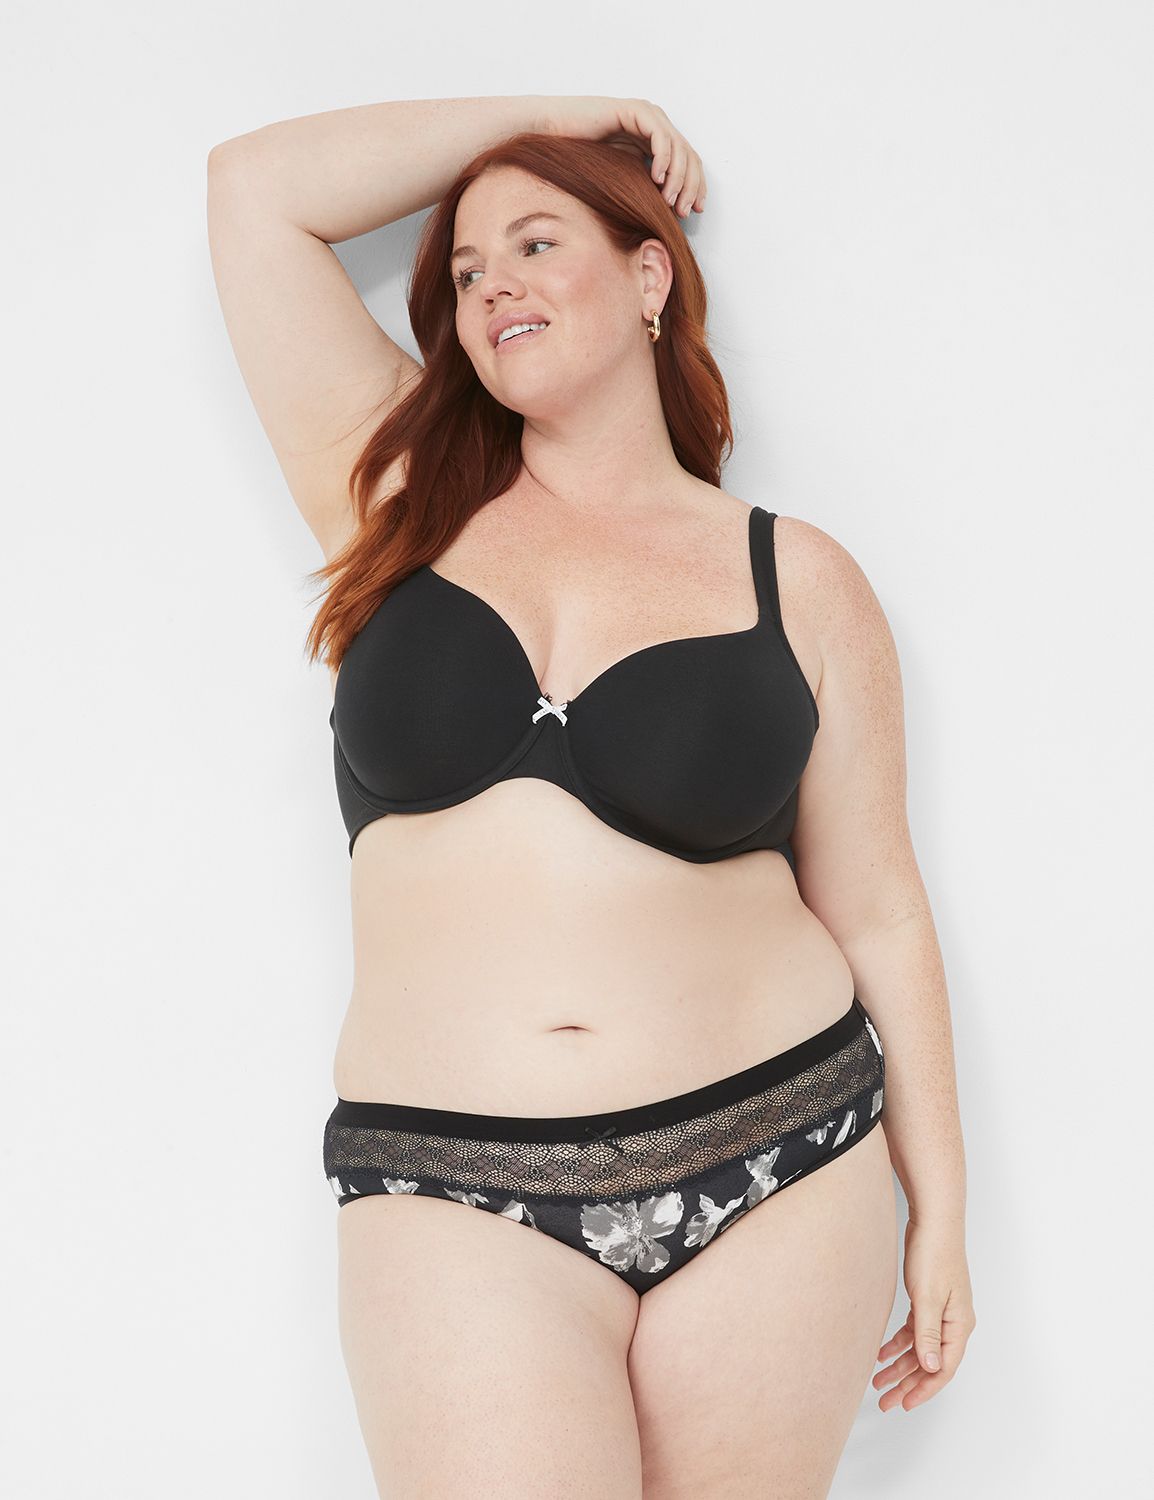 Lane Bryant - Treat your tush: 7/$35 panties are back! Shop: http